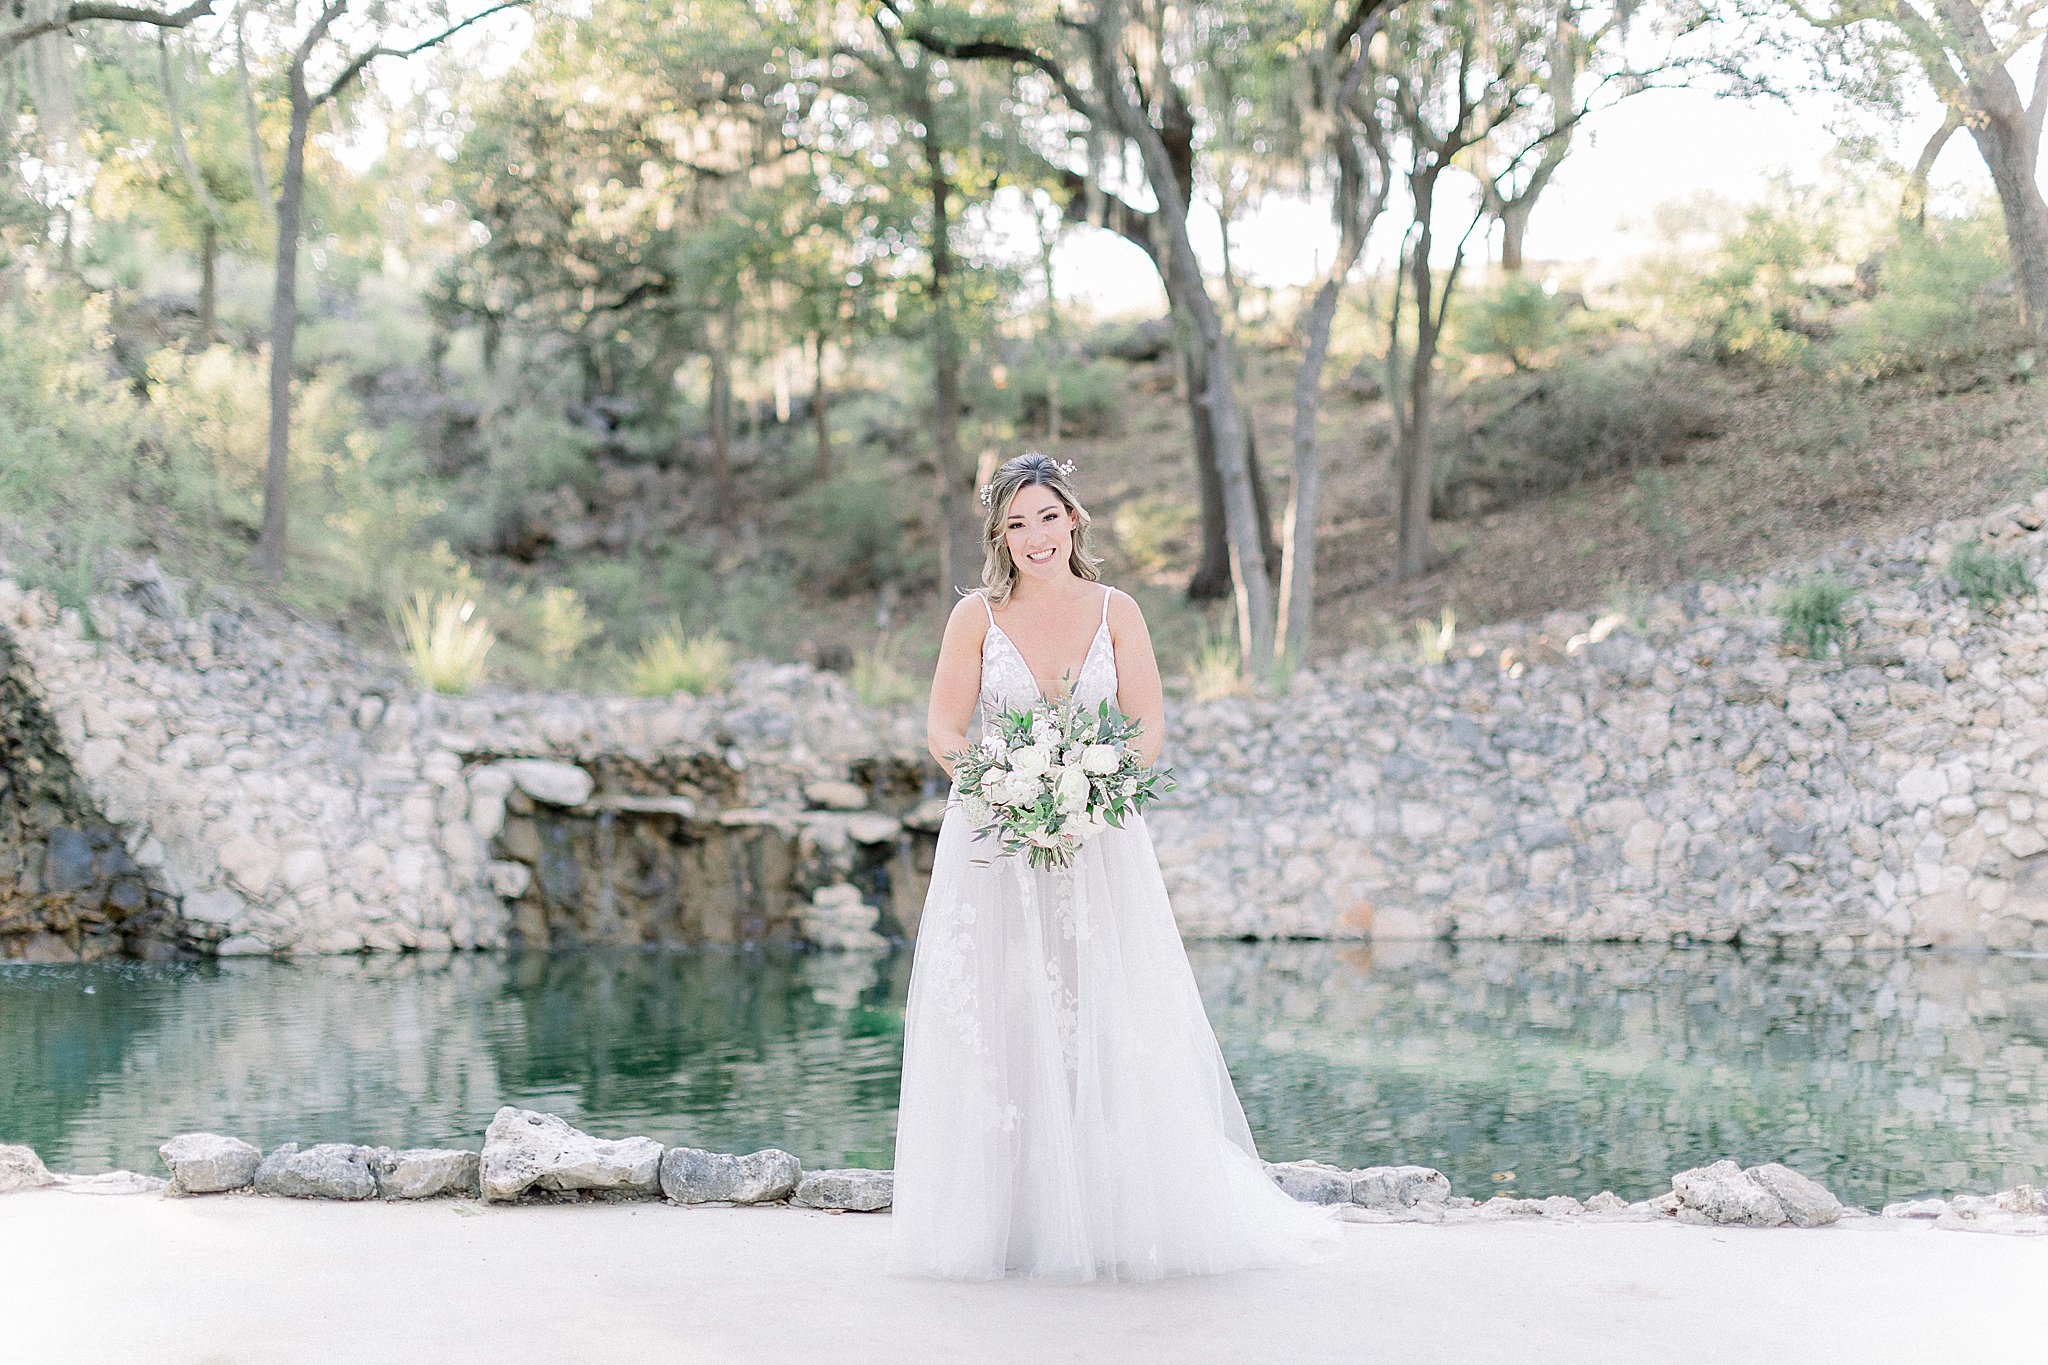 Classic Bridal Portraits at Hayes Hollow, Hidden Falls, Spring Branch, Texas | Anna Kay Photography | Hill Country Wedding Photographer